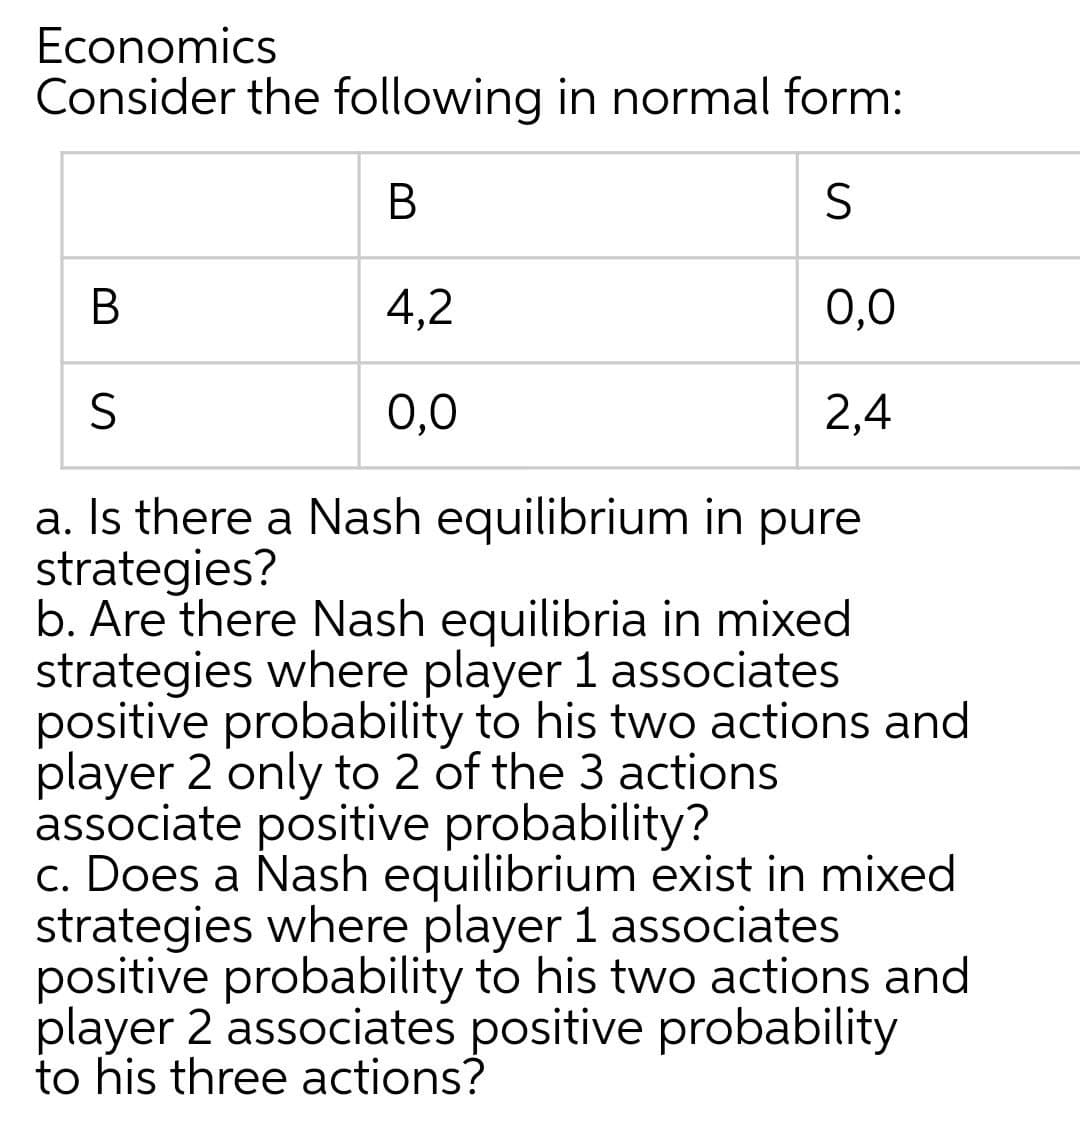 Economics
Consider the following in normal form:
В
В
4,2
0,0
0,0
2,4
a. Is there a Nash equilibrium in pure
strategies?
b. Are there Nash equilibria in mixed
strategies where player 1 associates
positive probability to his two actions and
player 2 only to 2 of the 3 actions
associate positive probability?
c. Does a Nash equilibrium exist in mixed
strategies where player 1 associates
positive probability to his two actions and
player 2 associates positive probability
to his three actions?
